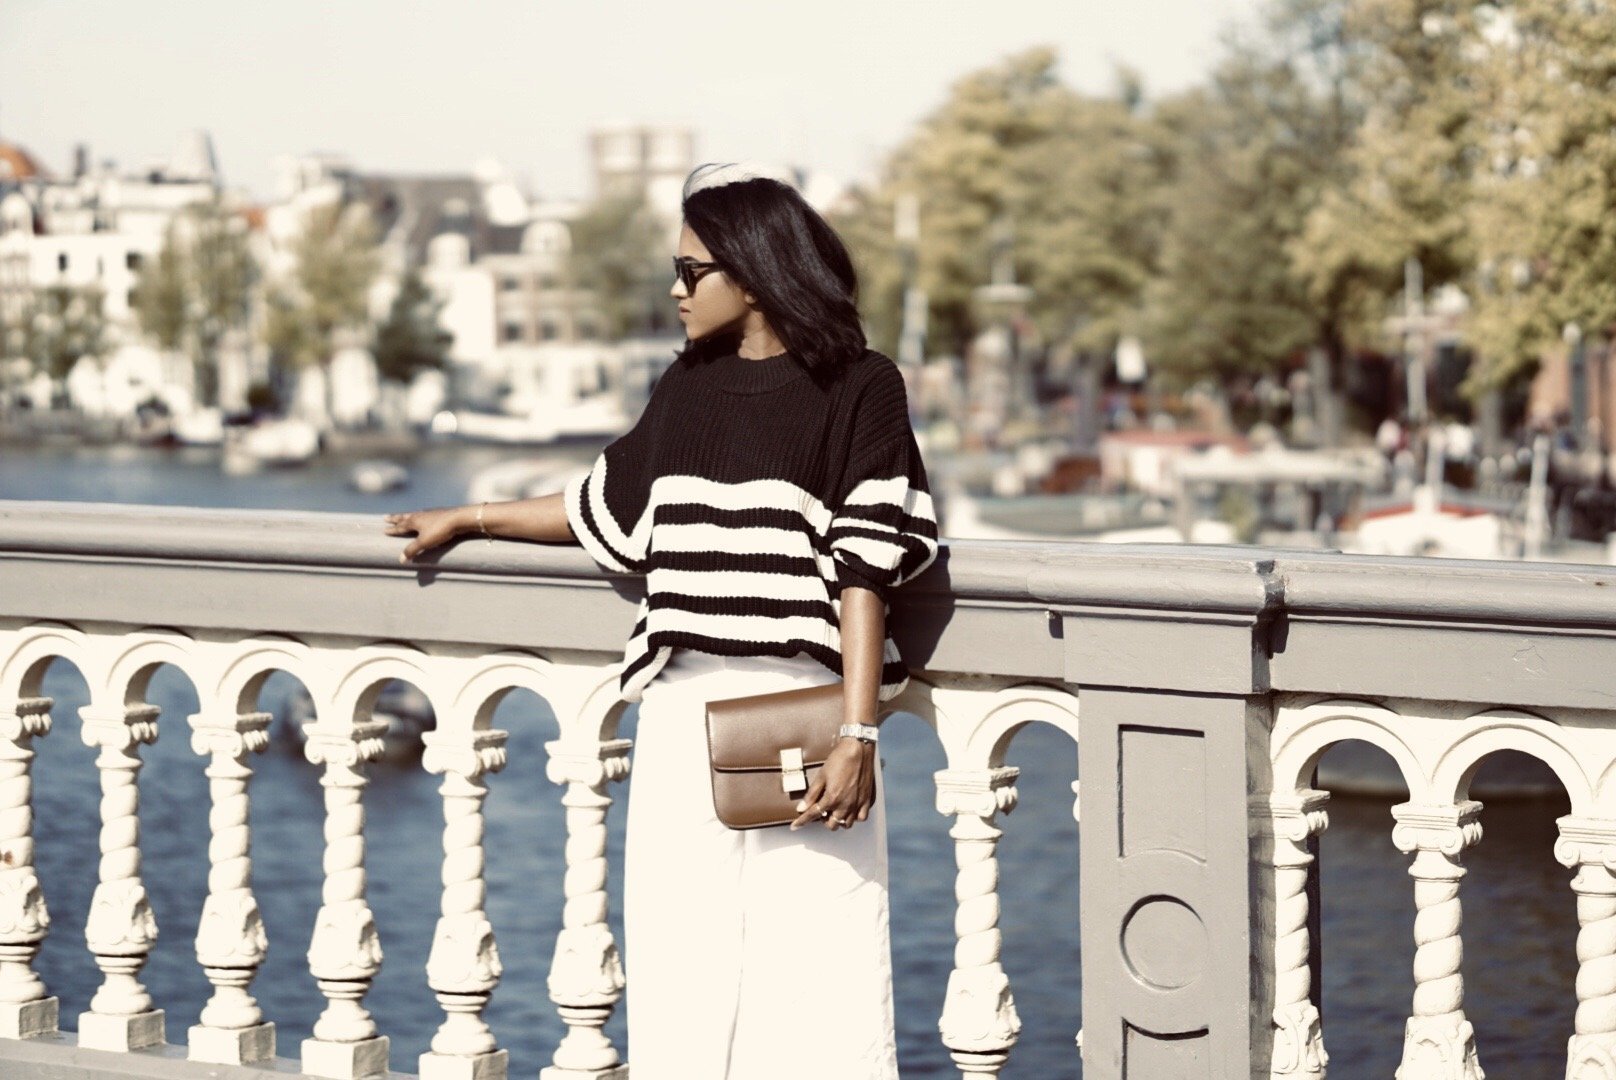 Sachini in Amsterdam on a bridge wearing black and white knitwear, white culottes holding a brown Celine bag